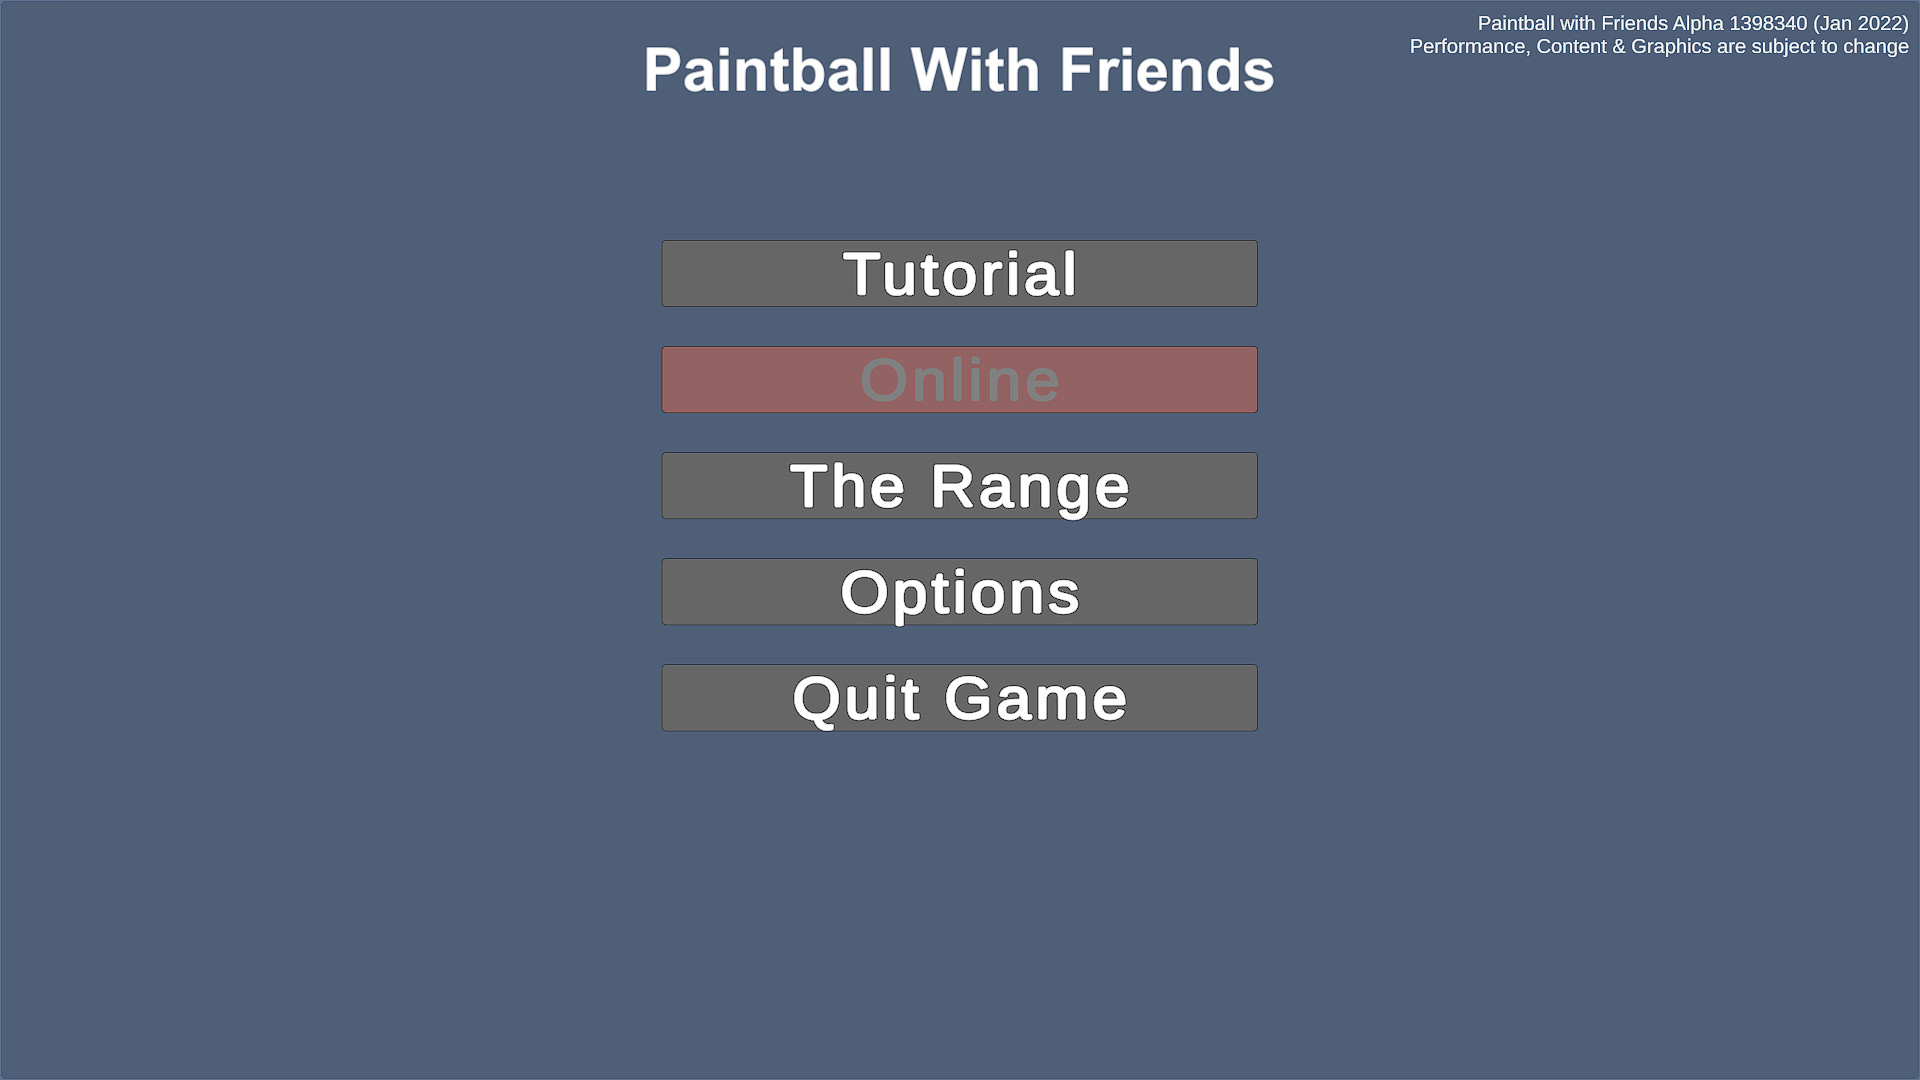 Paintball with Friends Featured Screenshot #1